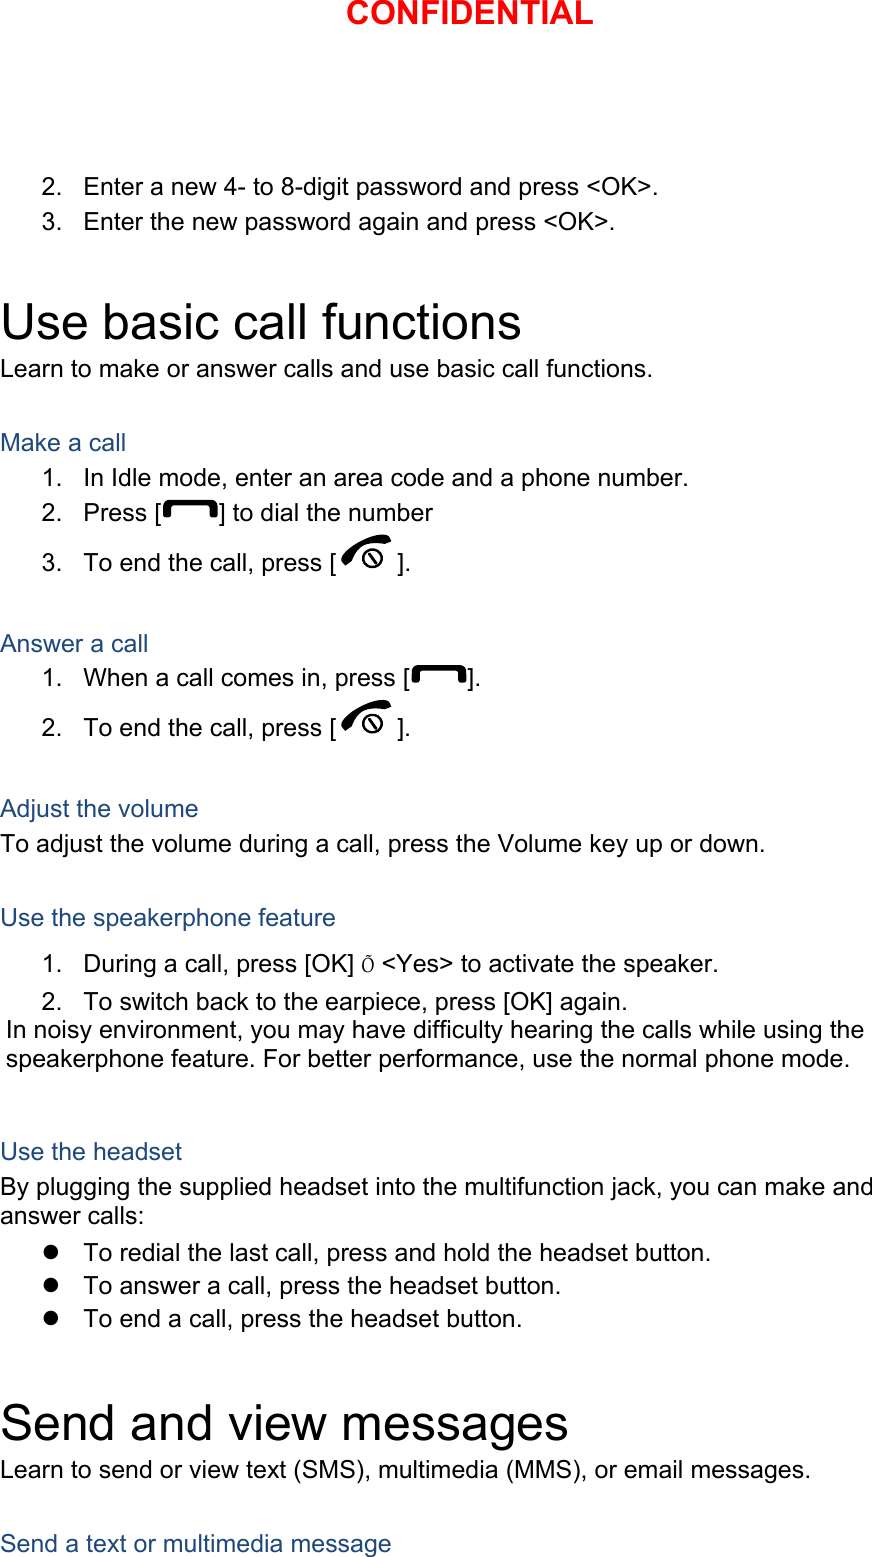 2.  Enter a new 4- to 8-digit password and press &lt;OK&gt;. 3.  Enter the new password again and press &lt;OK&gt;.  Use basic call functions Learn to make or answer calls and use basic call functions.  Make a call 1.  In Idle mode, enter an area code and a phone number. 2. Press [ ] to dial the number 3.  To end the call, press [ ].   Answer a call 1.  When a call comes in, press [ ]. 2.  To end the call, press [ ].  Adjust the volume To adjust the volume during a call, press the Volume key up or down.  Use the speakerphone feature 1.  During a call, press [OK] Õ &lt;Yes&gt; to activate the speaker. 2.  To switch back to the earpiece, press [OK] again. In noisy environment, you may have difficulty hearing the calls while using the speakerphone feature. For better performance, use the normal phone mode.  Use the headset By plugging the supplied headset into the multifunction jack, you can make and answer calls: z  To redial the last call, press and hold the headset button. z  To answer a call, press the headset button. z  To end a call, press the headset button.  Send and view messages Learn to send or view text (SMS), multimedia (MMS), or email messages.  Send a text or multimedia message CONFIDENTIAL